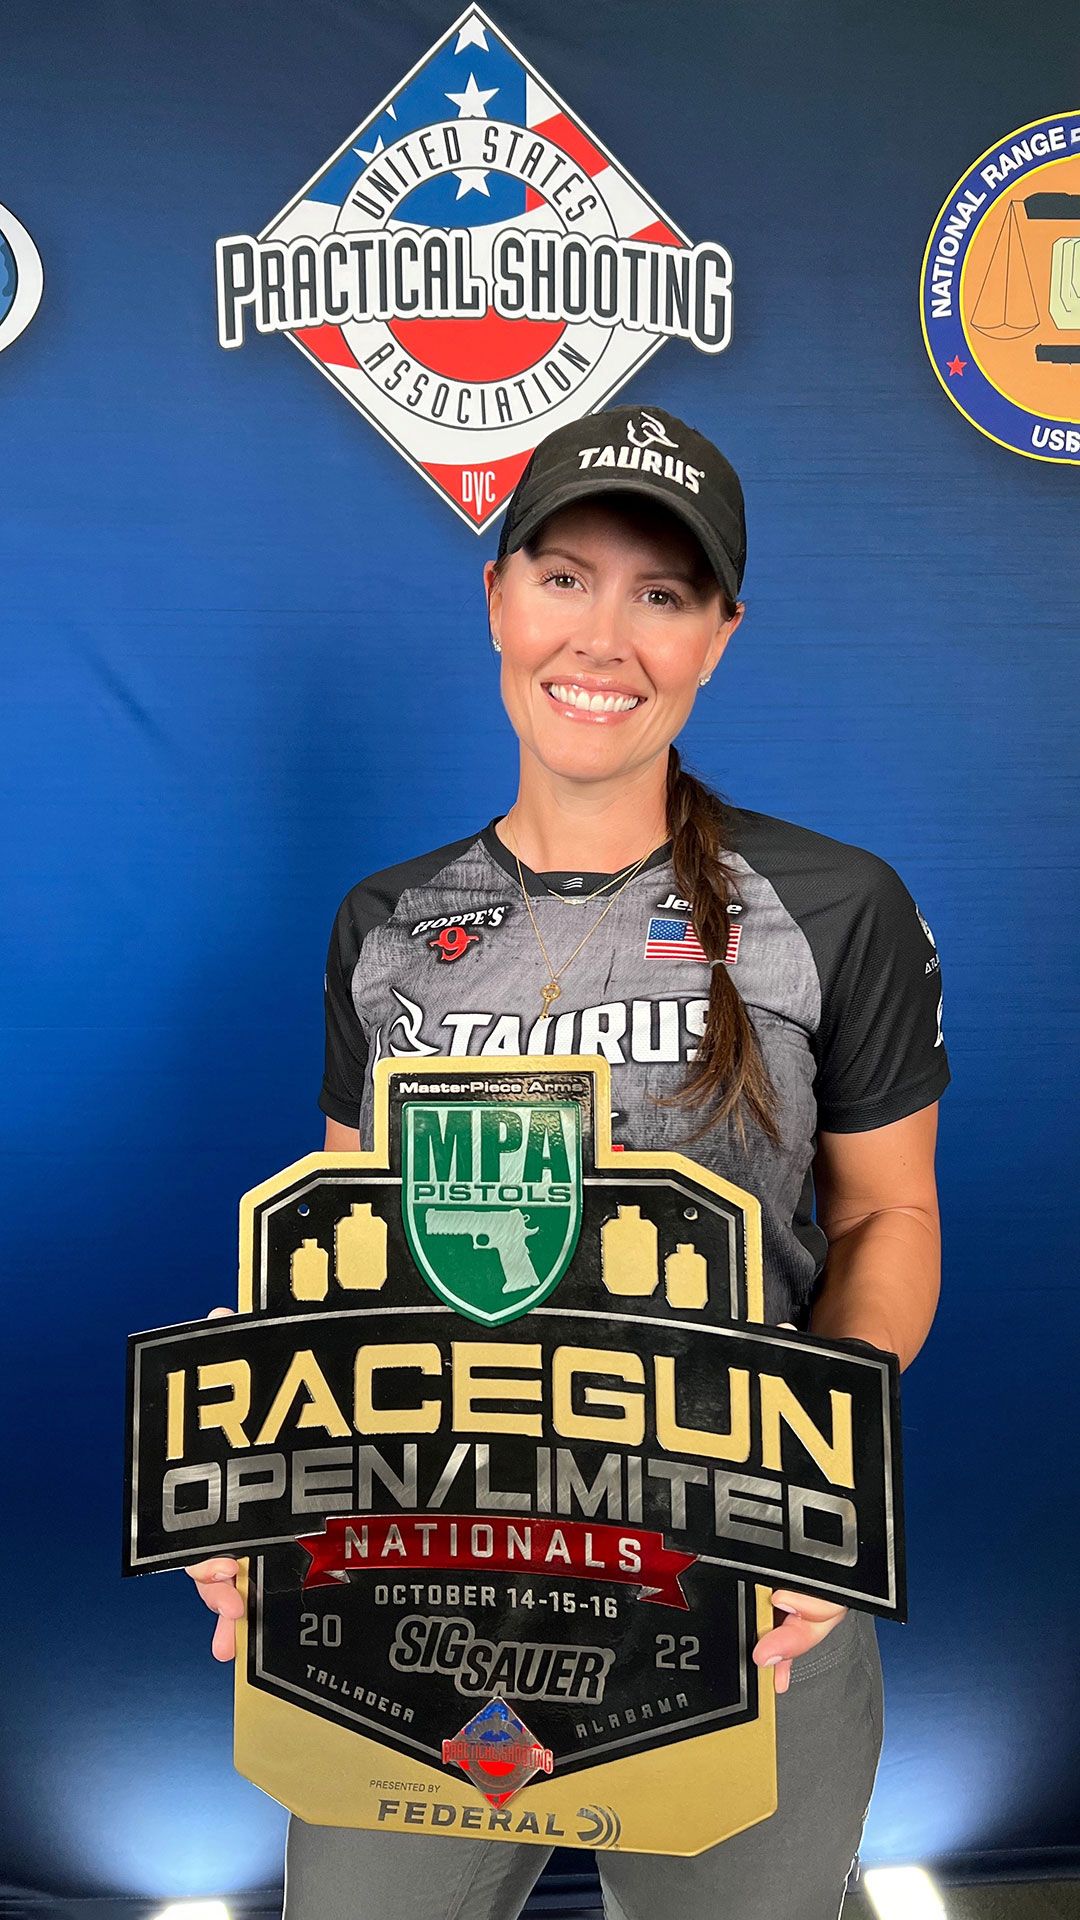 3 for 3: Jessie Harrison Takes her 3rd Straight Major Championship